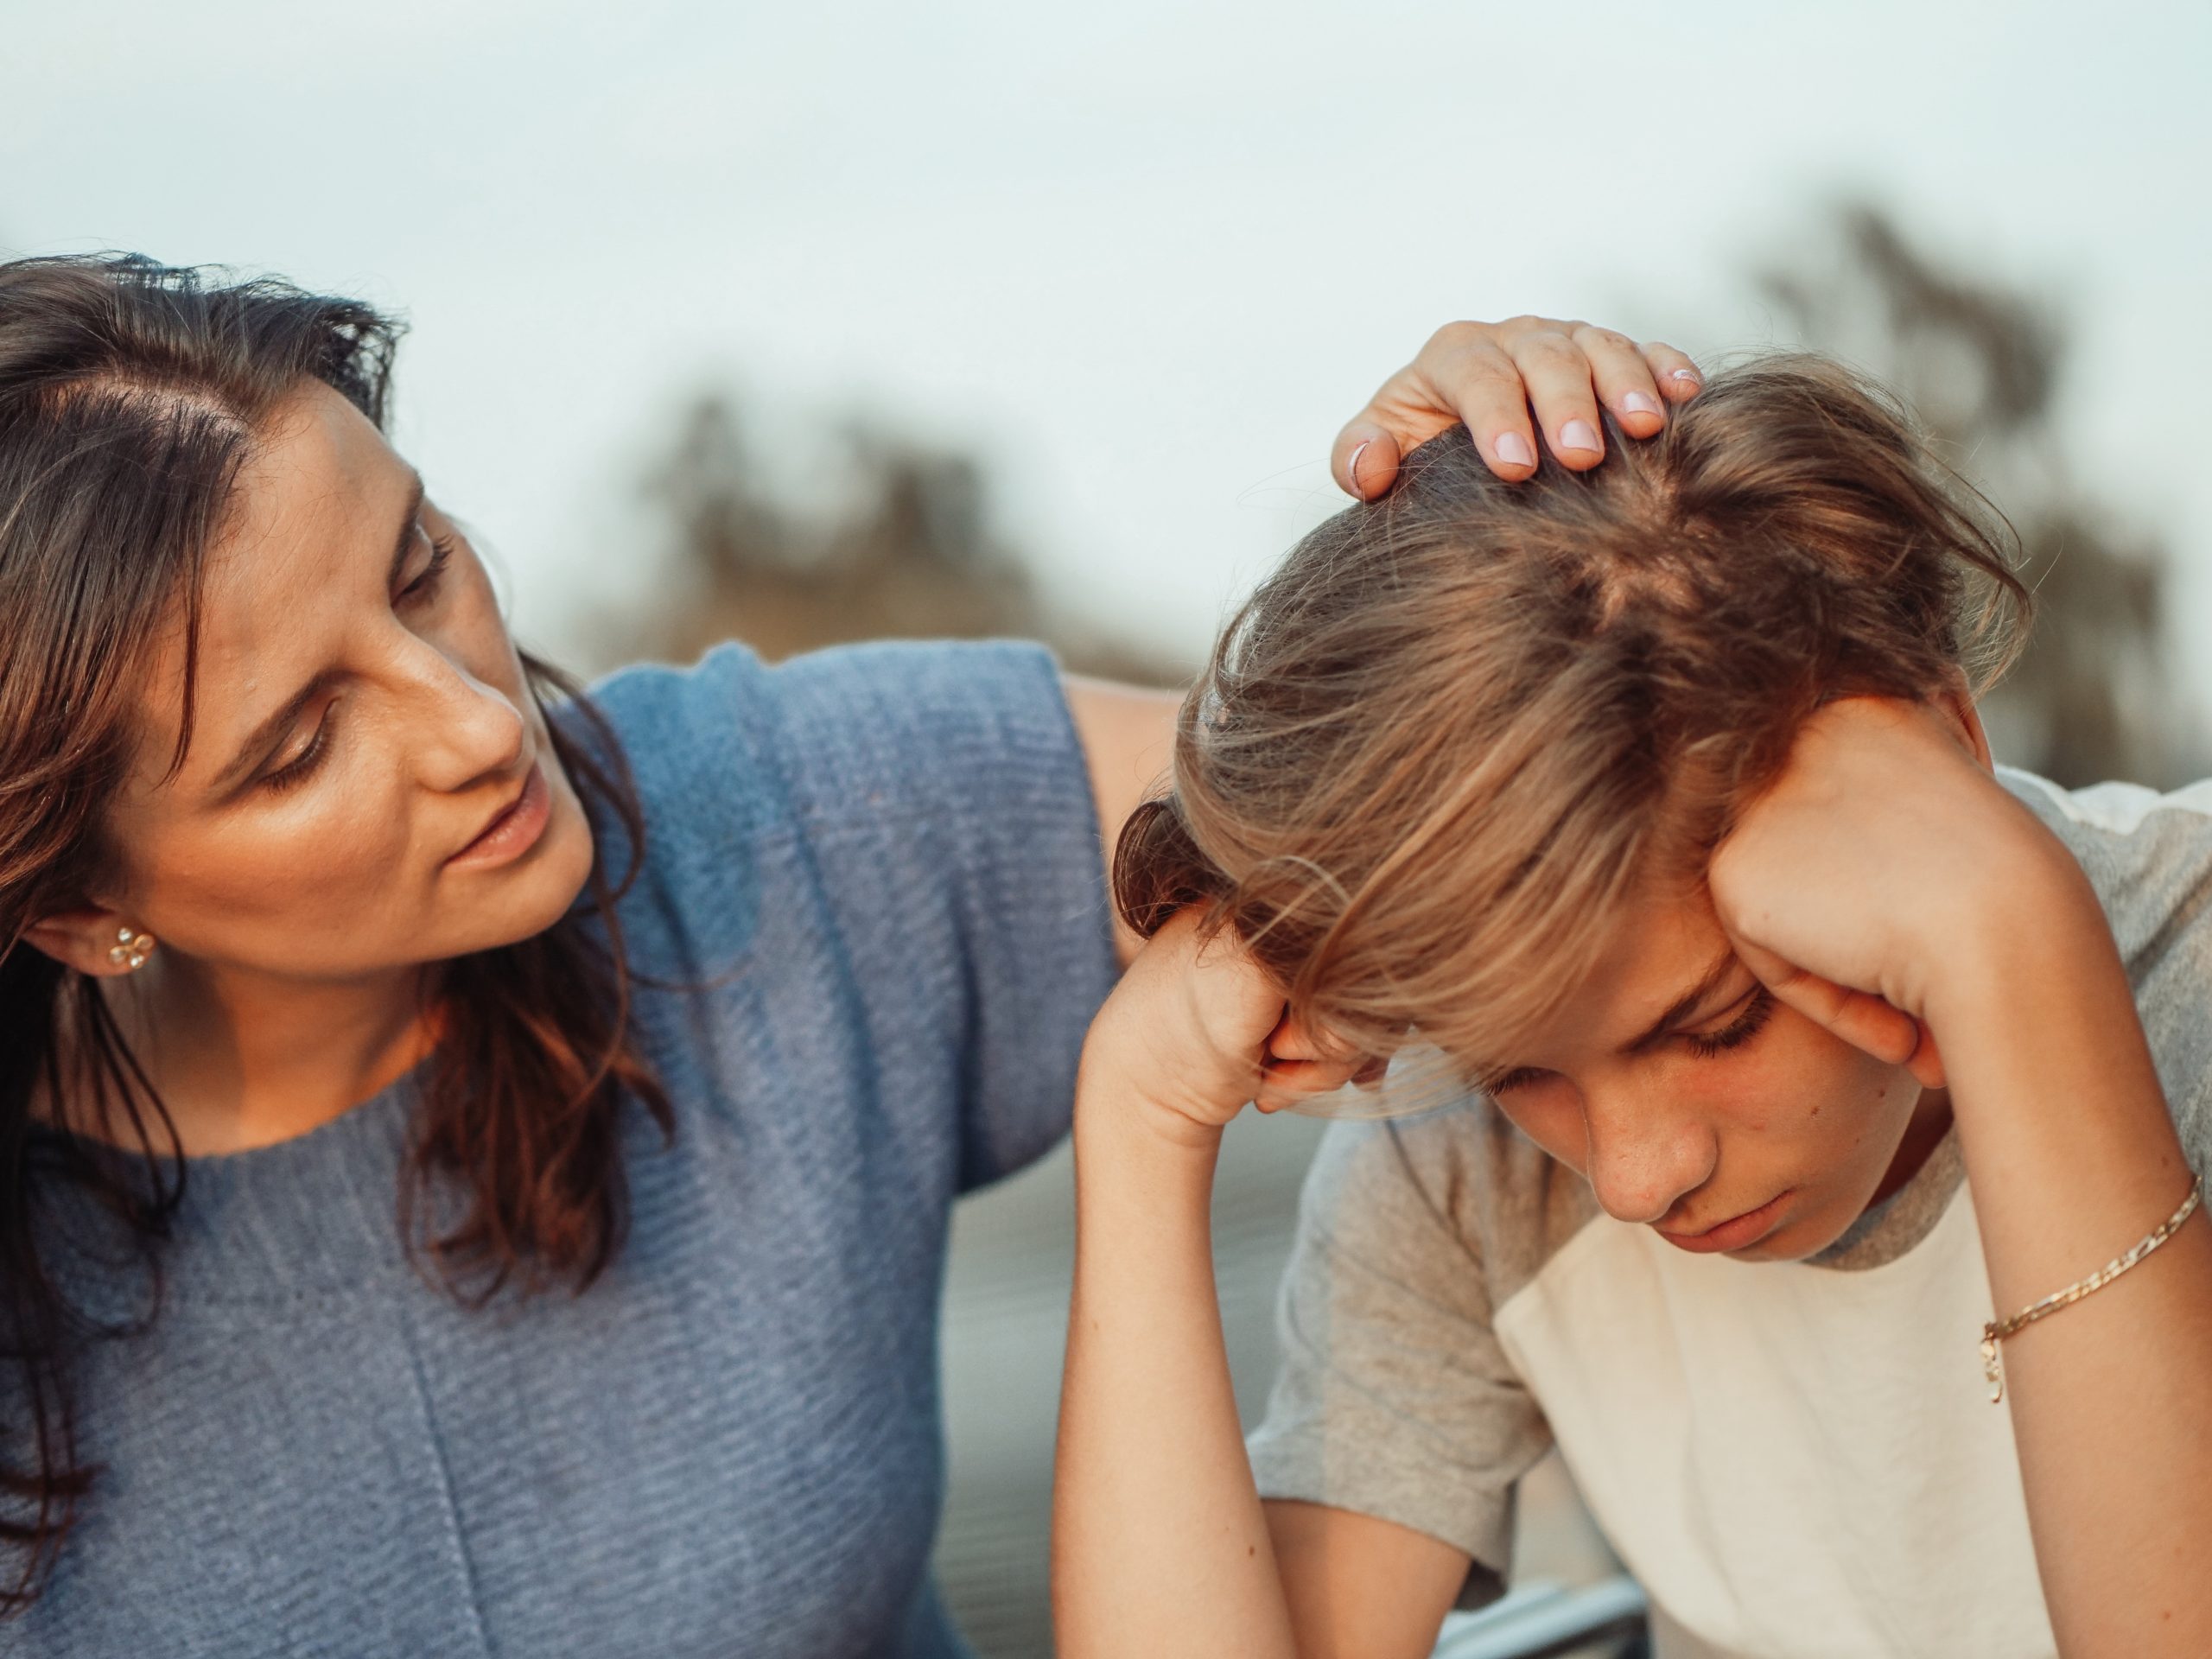 Four Principles for a Godly Response to Your Teen’s Crisis